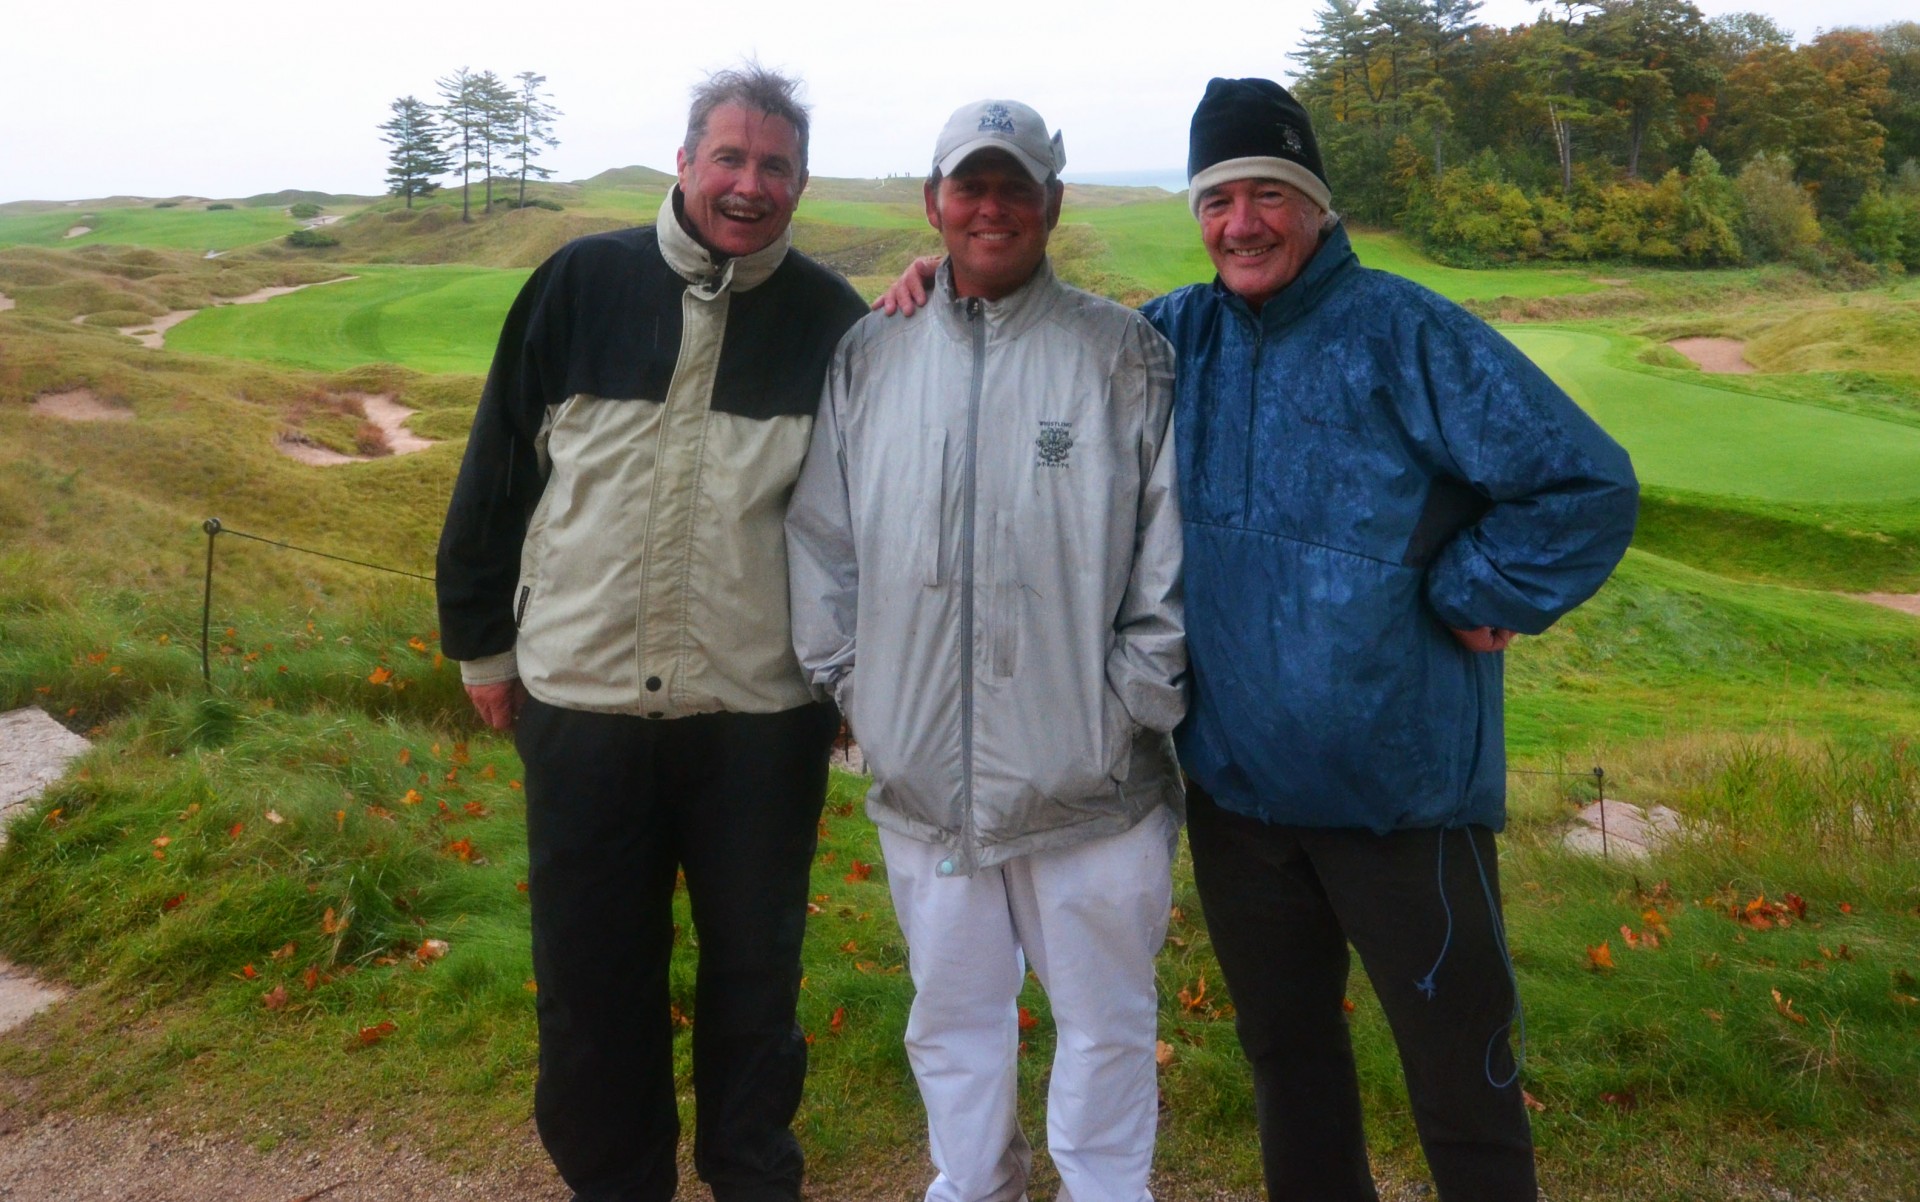 Brian, Dale and Scott Scheurell after playing Whistling Straits